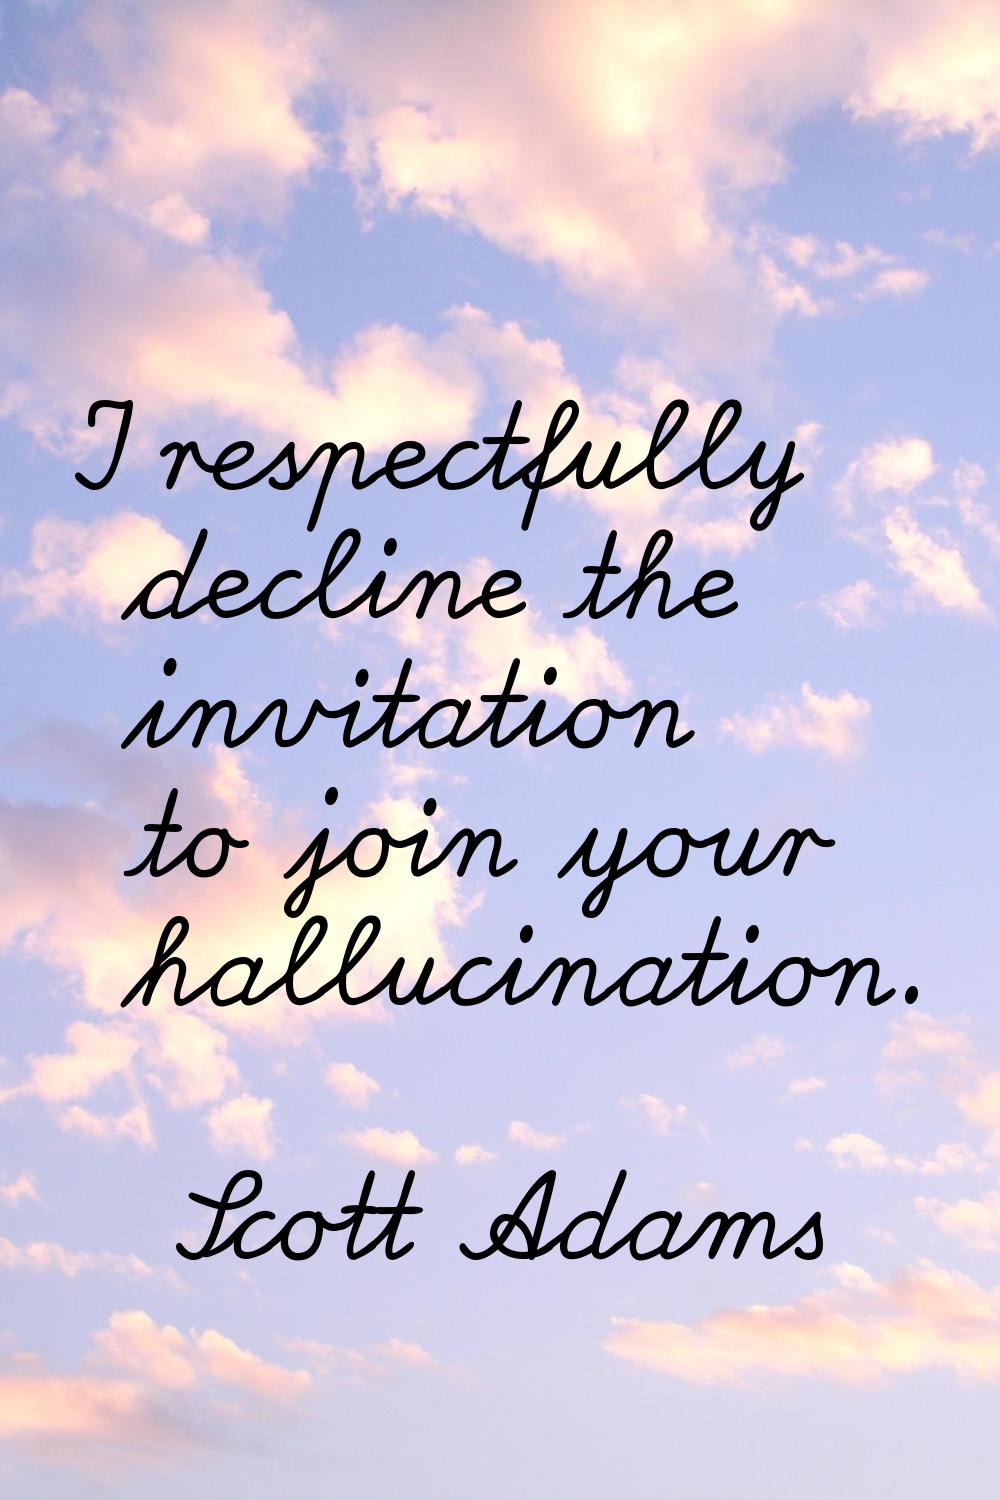 I respectfully decline the invitation to join your hallucination.